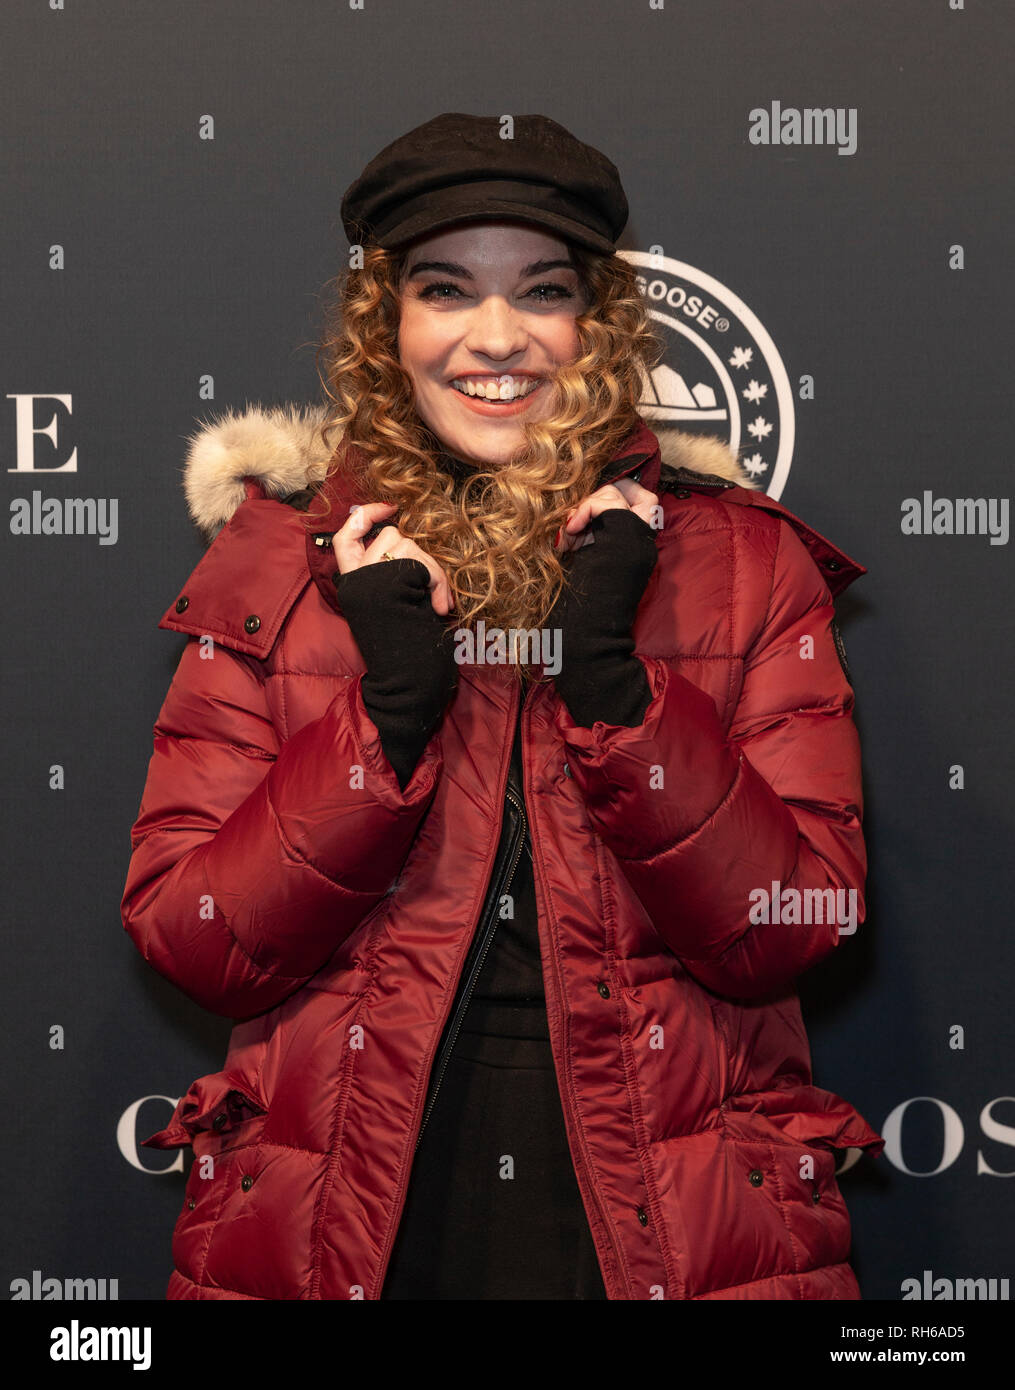 New York, NY - January 31, 2019: Annie Murphy attends Canada Goose Celebrates the Launch of Project Atigi at Studio 525 Credit: lev radin/Alamy Live News Stock Photo